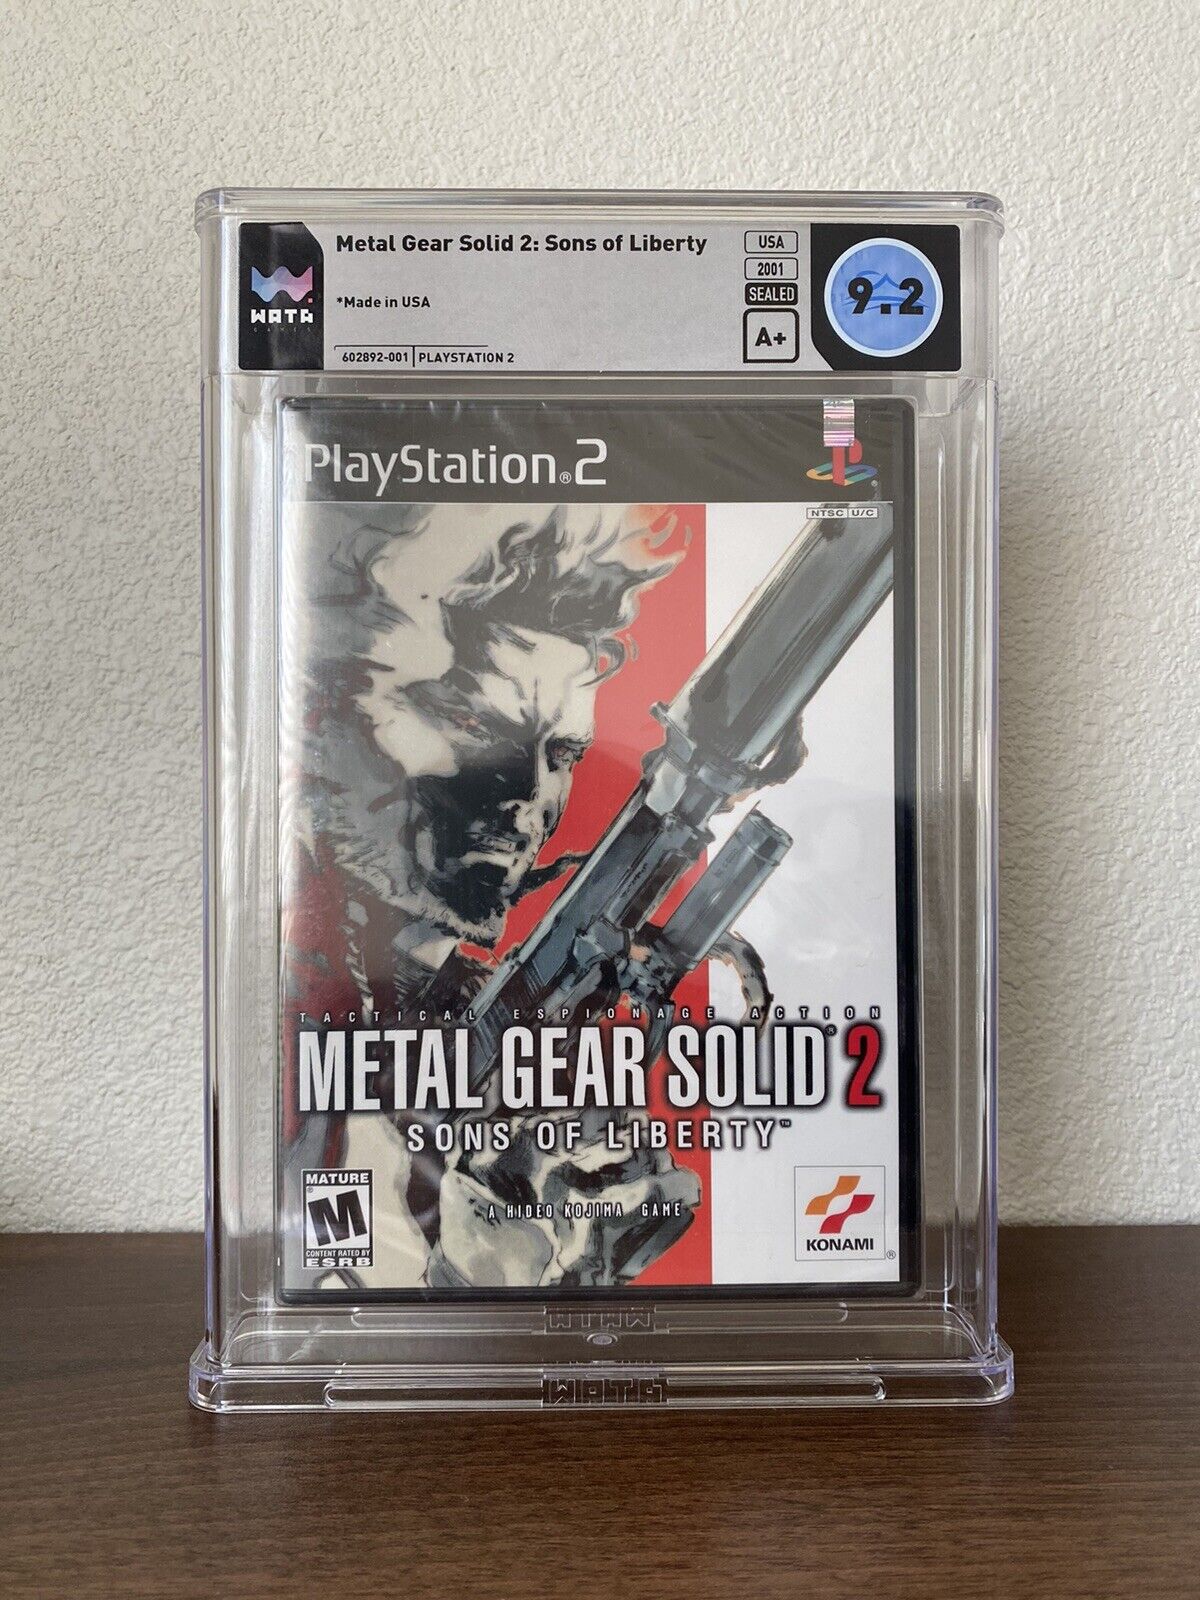 Metal Gear Solid 2: Sons of Liberty WATA 9.2 A+ Sony PlayStation 2